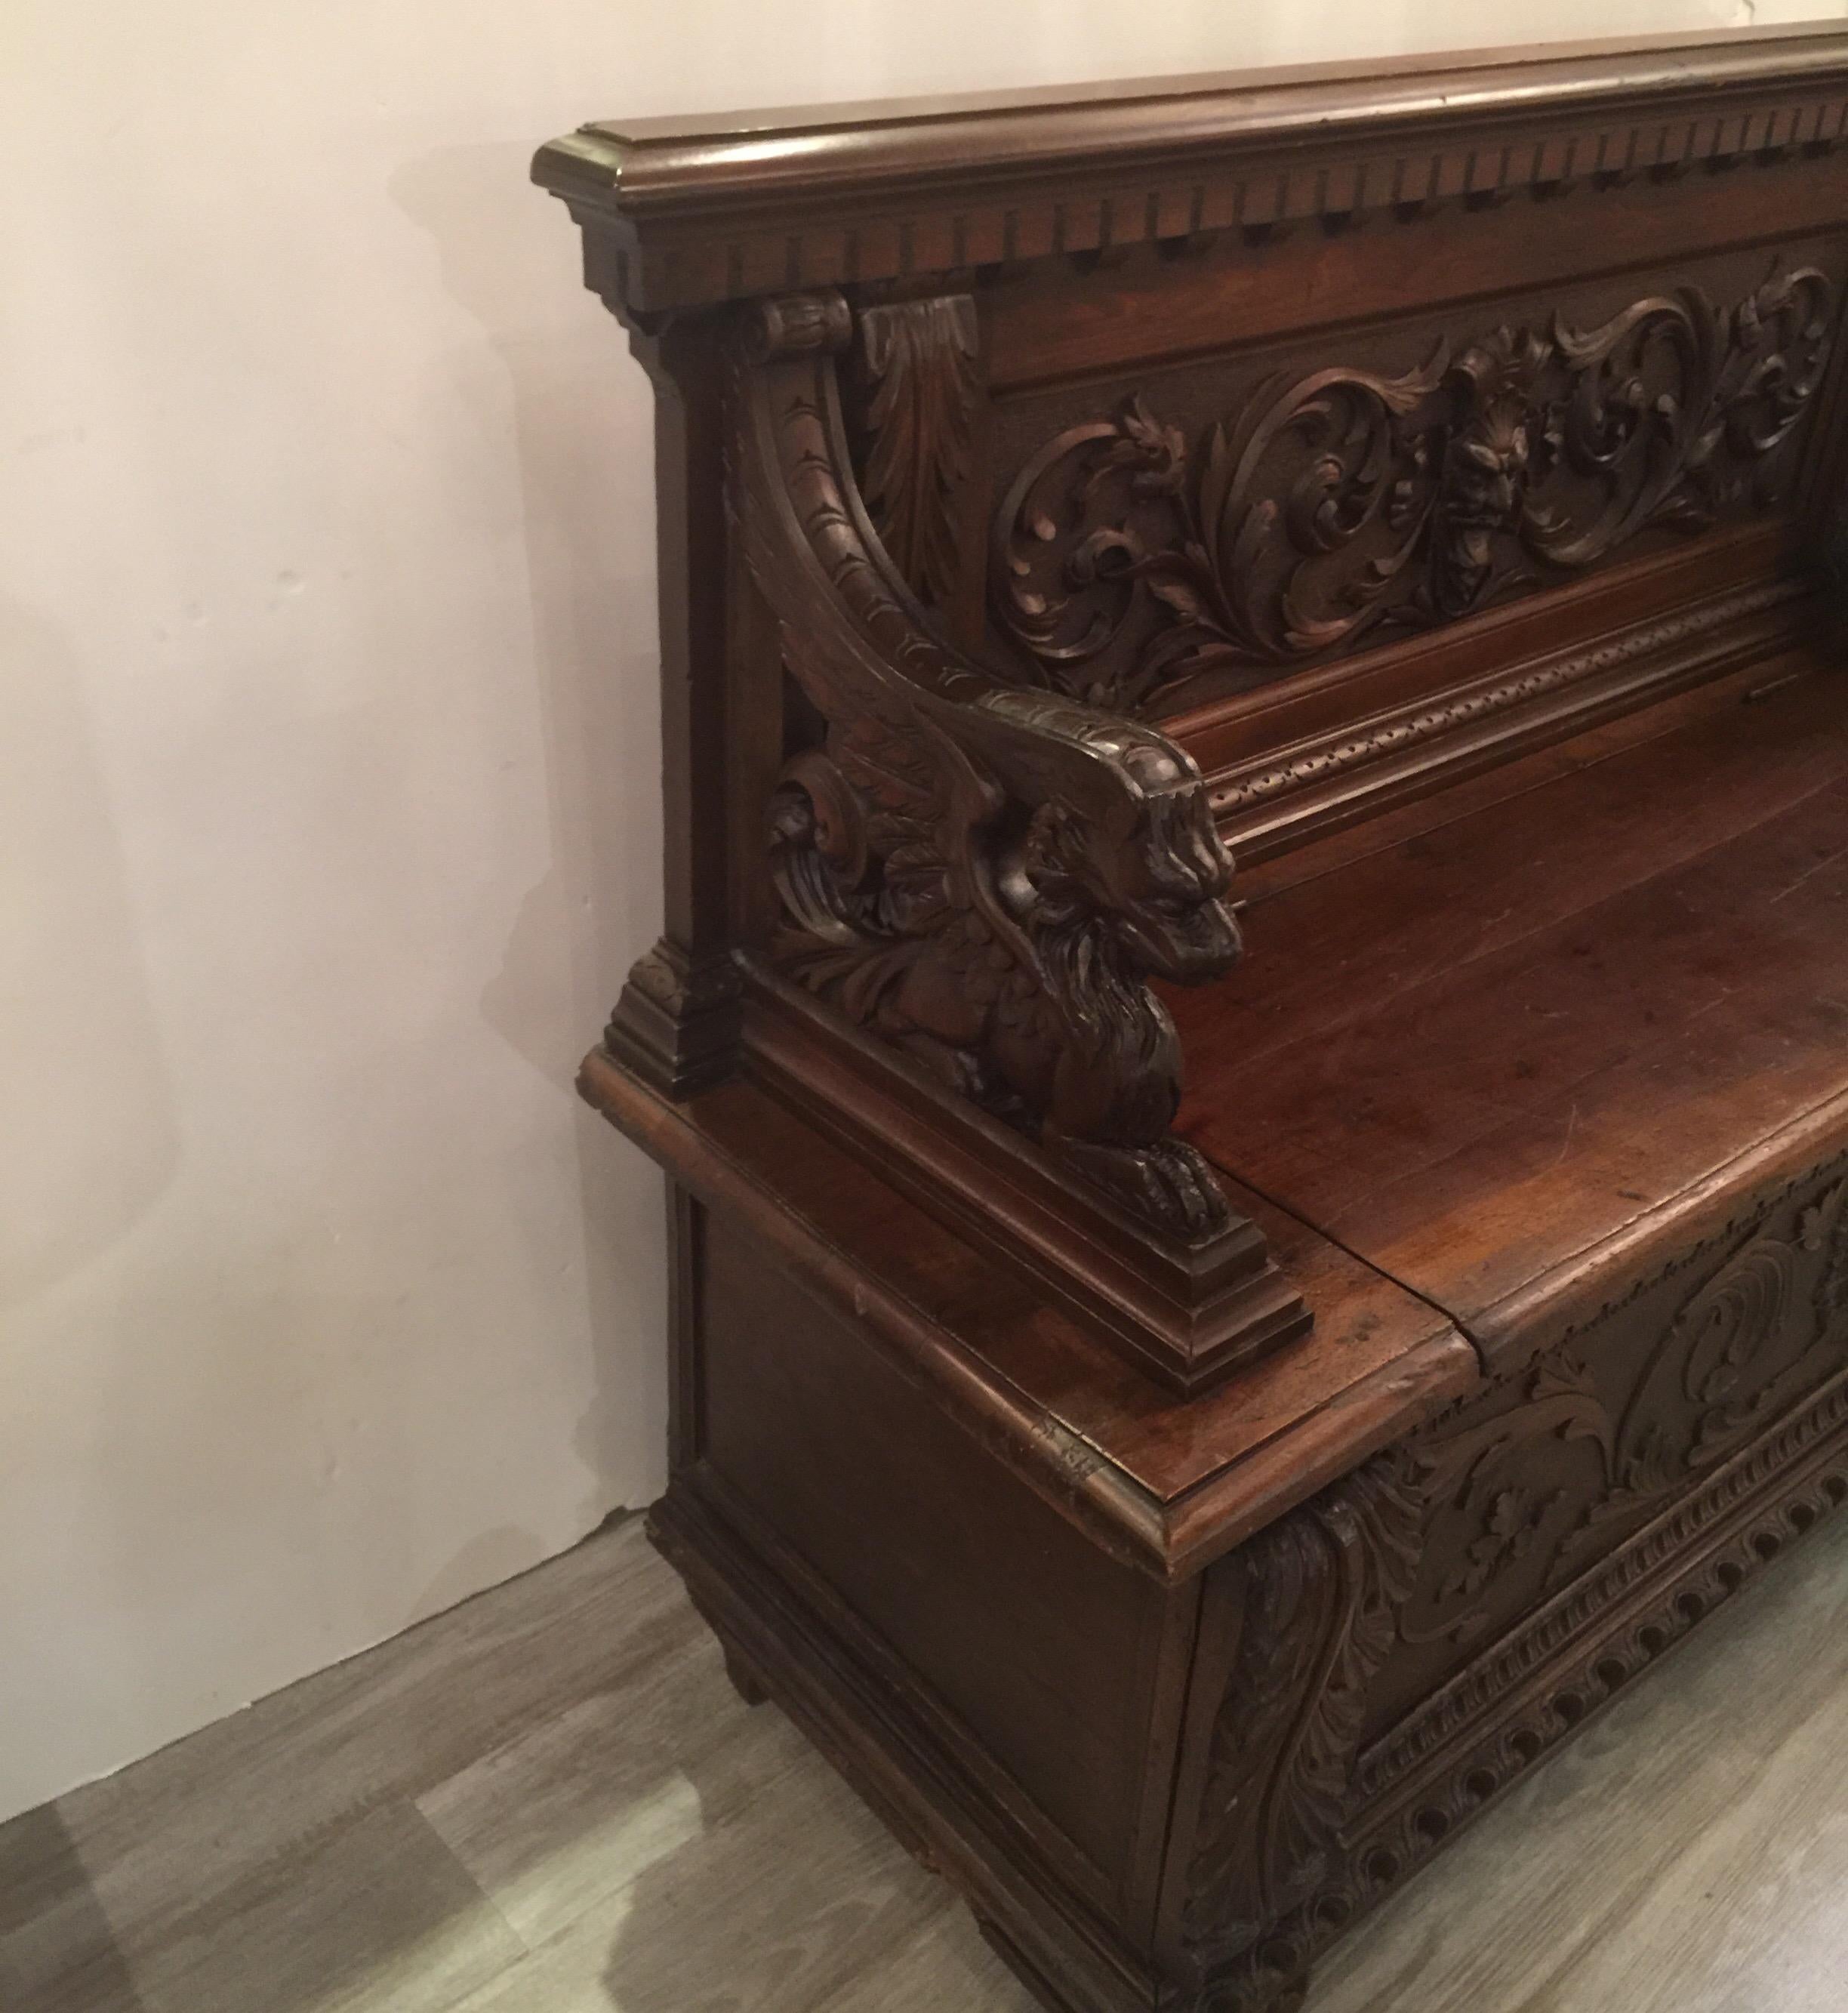 Mahogany Hand Carved Gothic European Walnut Hall Bench with Griffins, circa Late 1800s